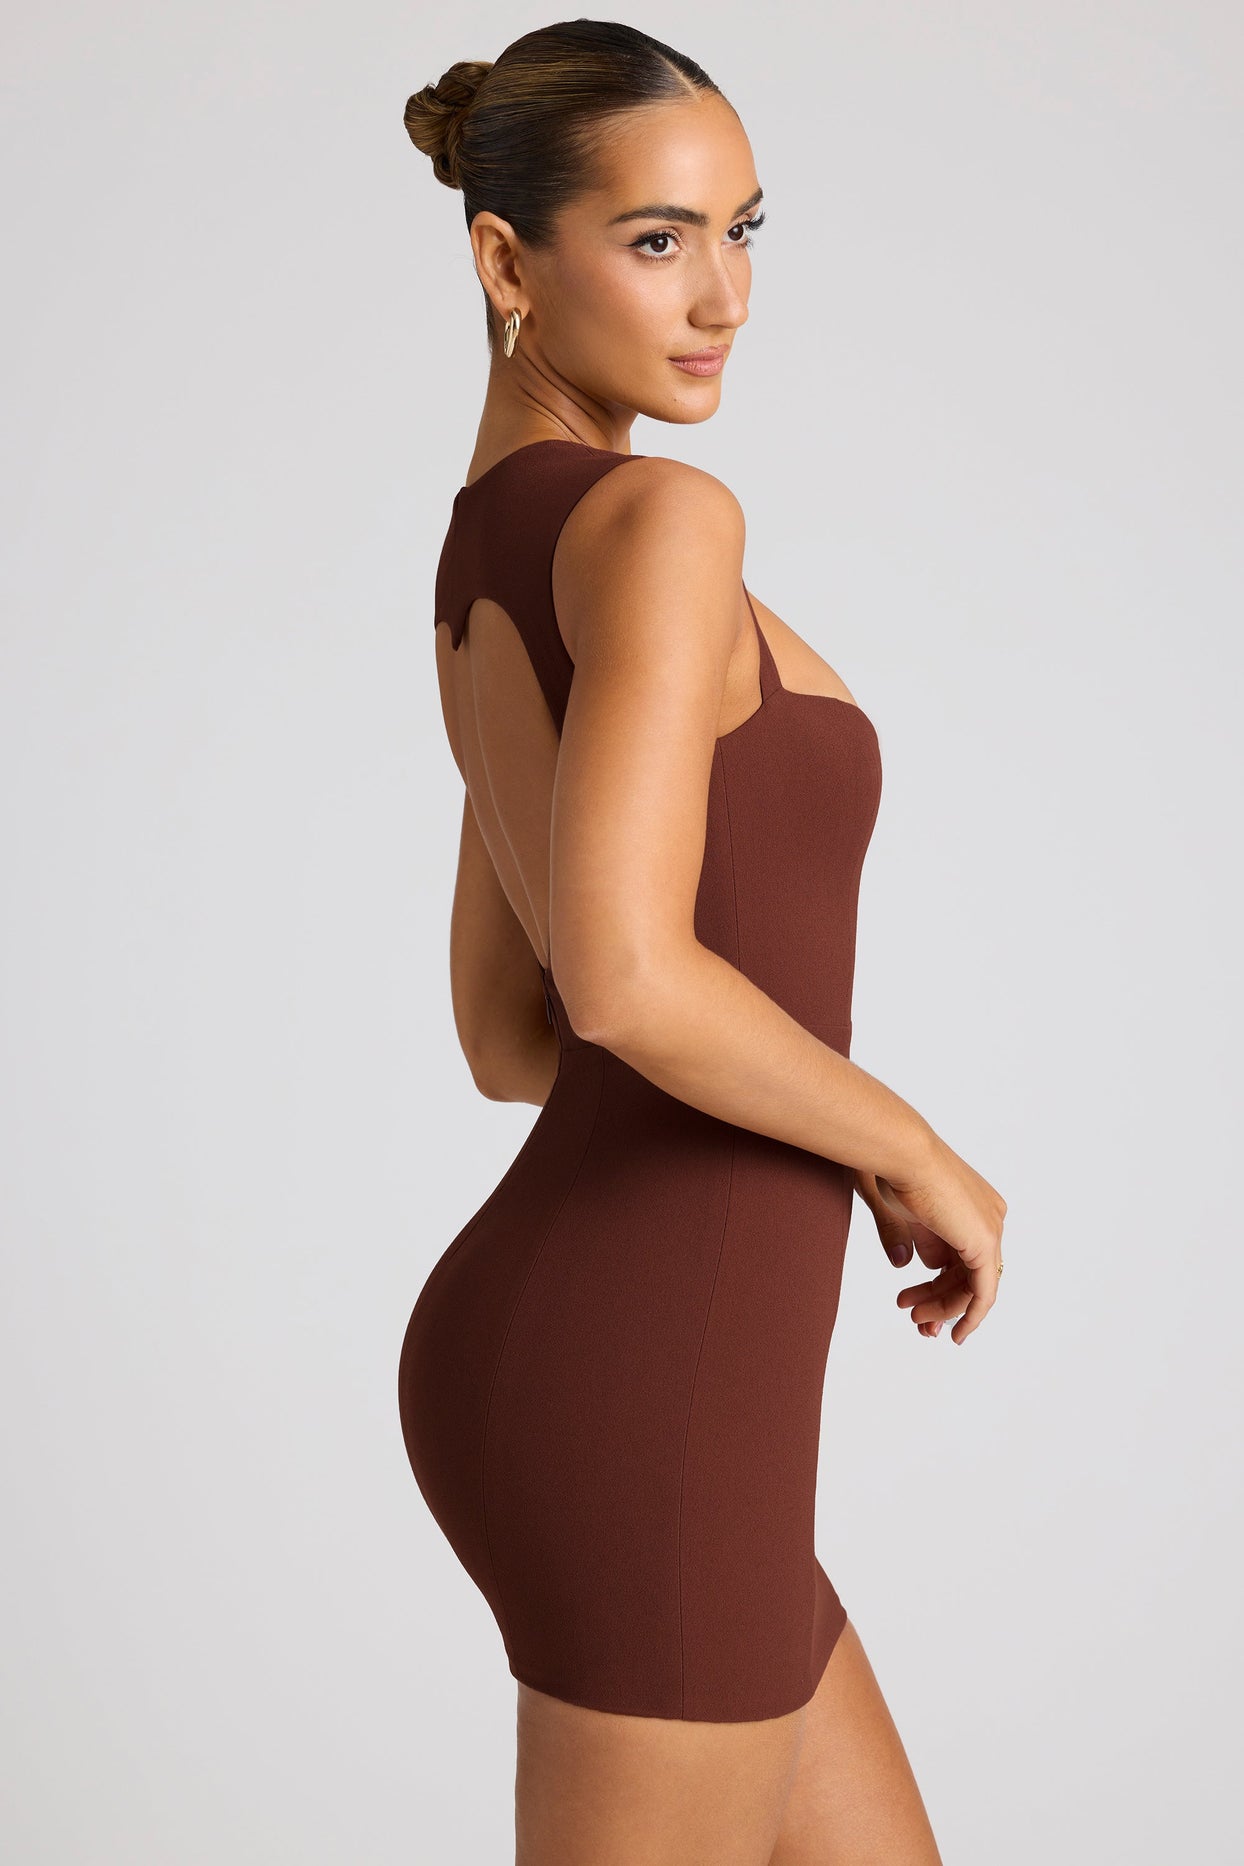 Heart Cut Out Mini Dress in Chocolate Brown